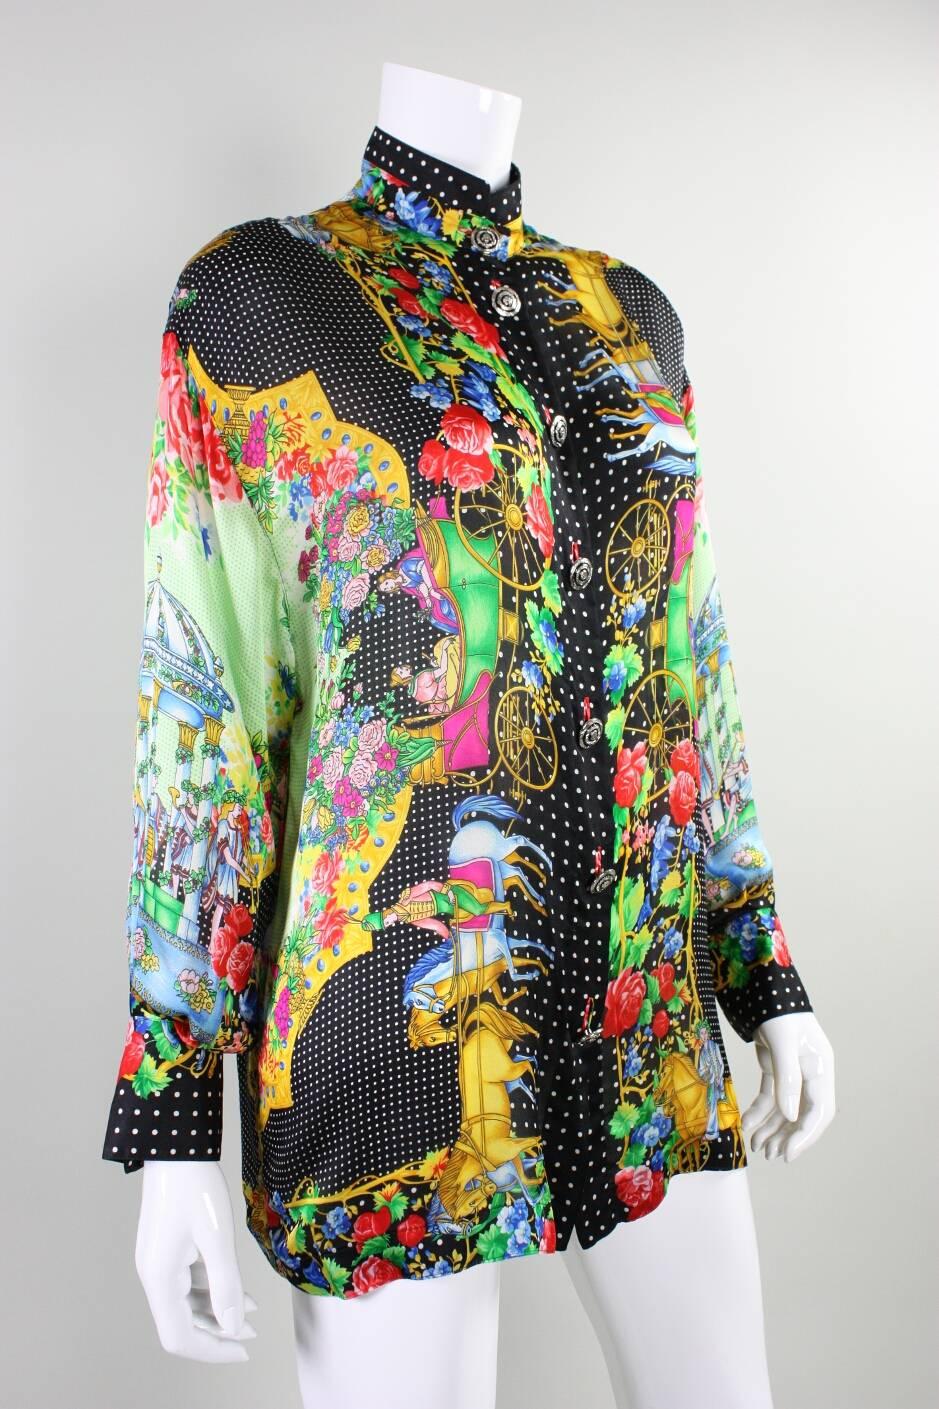 1990's Gianni Versace Couture blouse is made of silk charmeuse and dates to the 1990's. Blouse is multicolored and has a varying motifs. Center front silver-toned Medusa buttons with black enamel. Matching buttons at cuffs. Unlined.

Labeled size